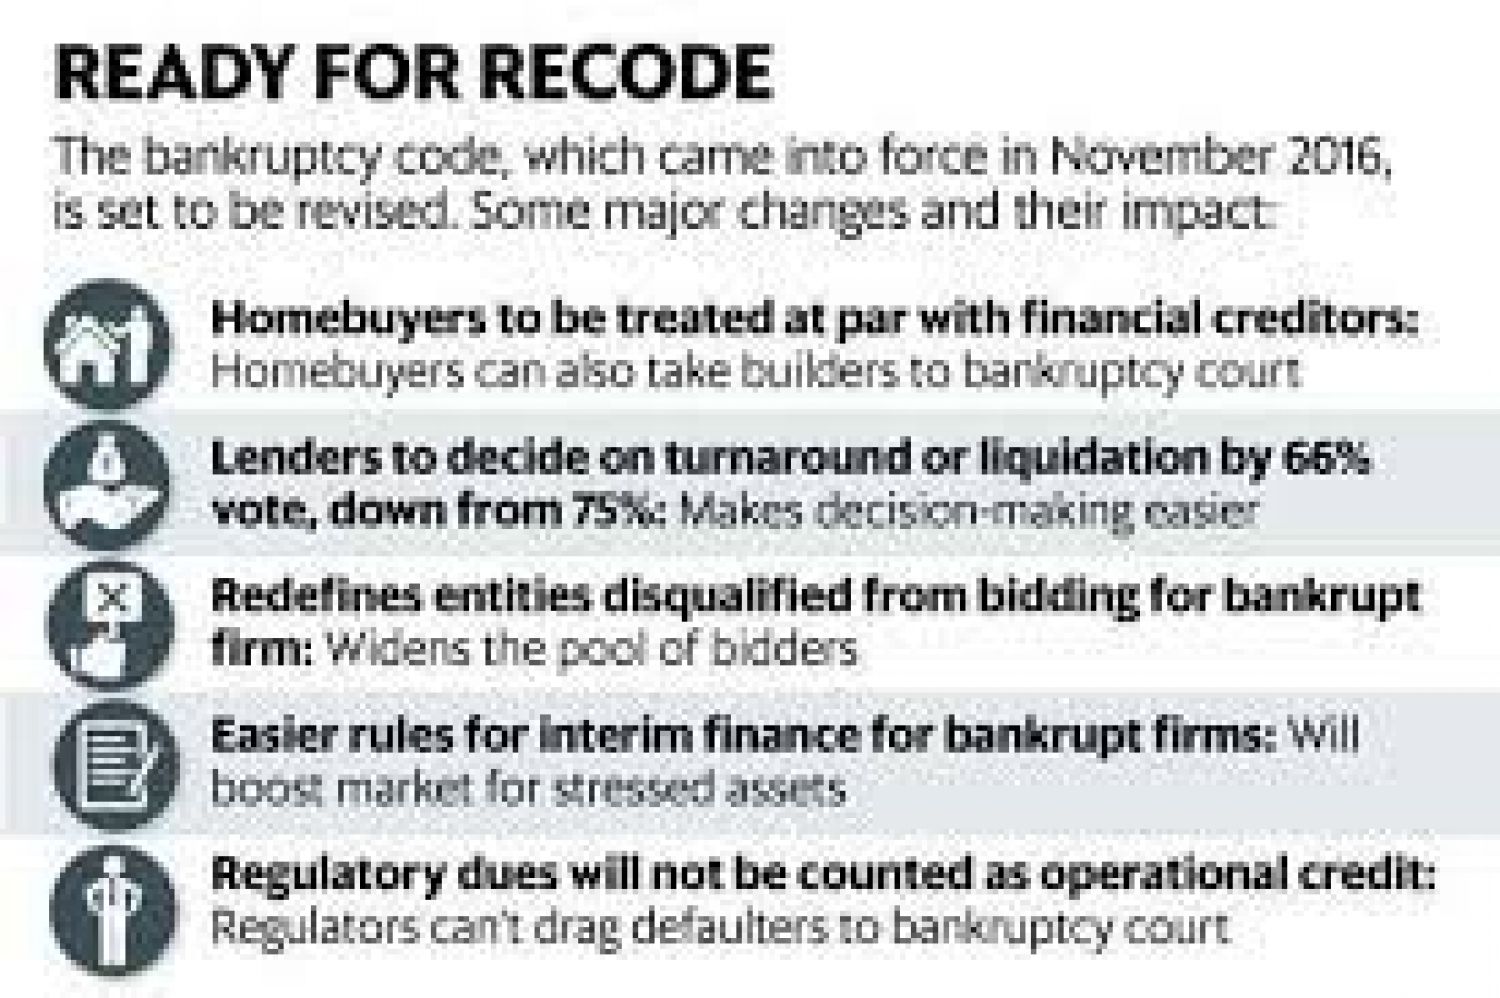 Overview on Major changes in Insolvency Law - IBC